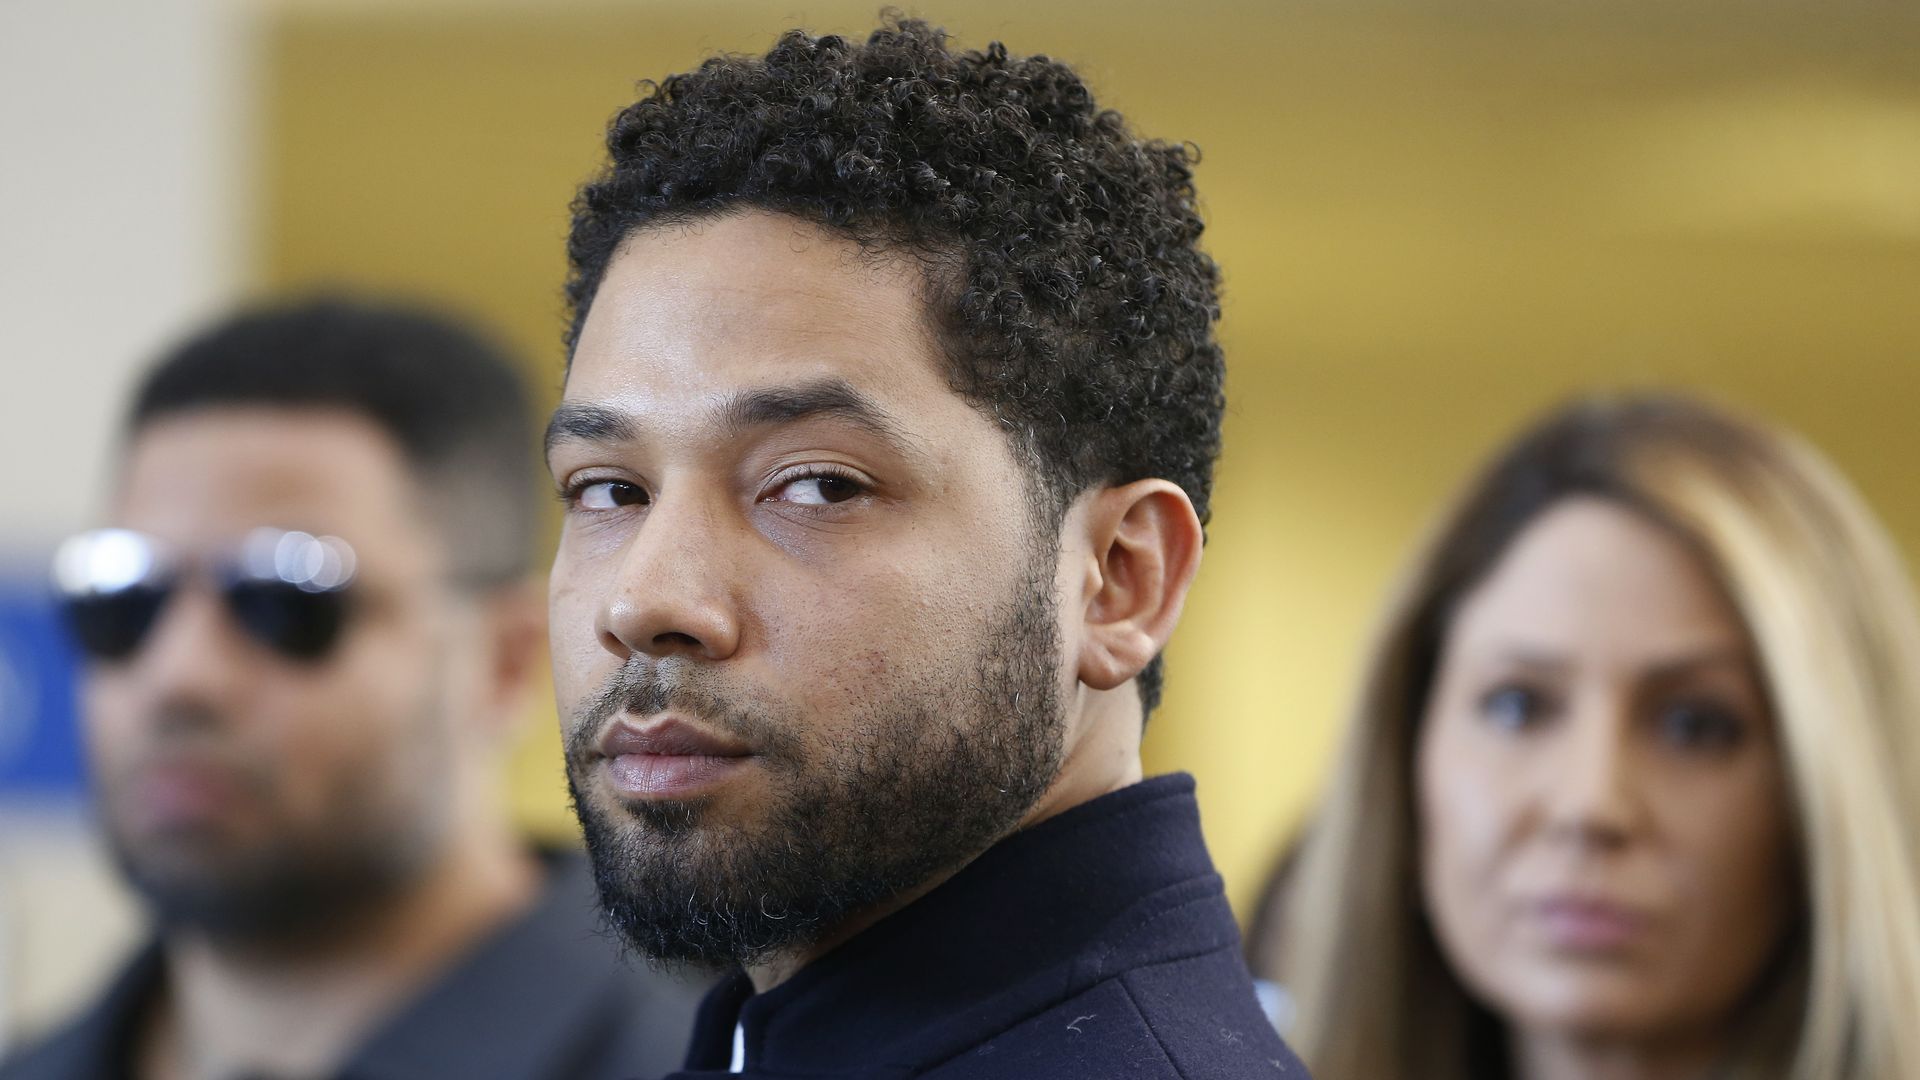 Lawyers for Jussie Smollett say he's the victim of a smear campaign.